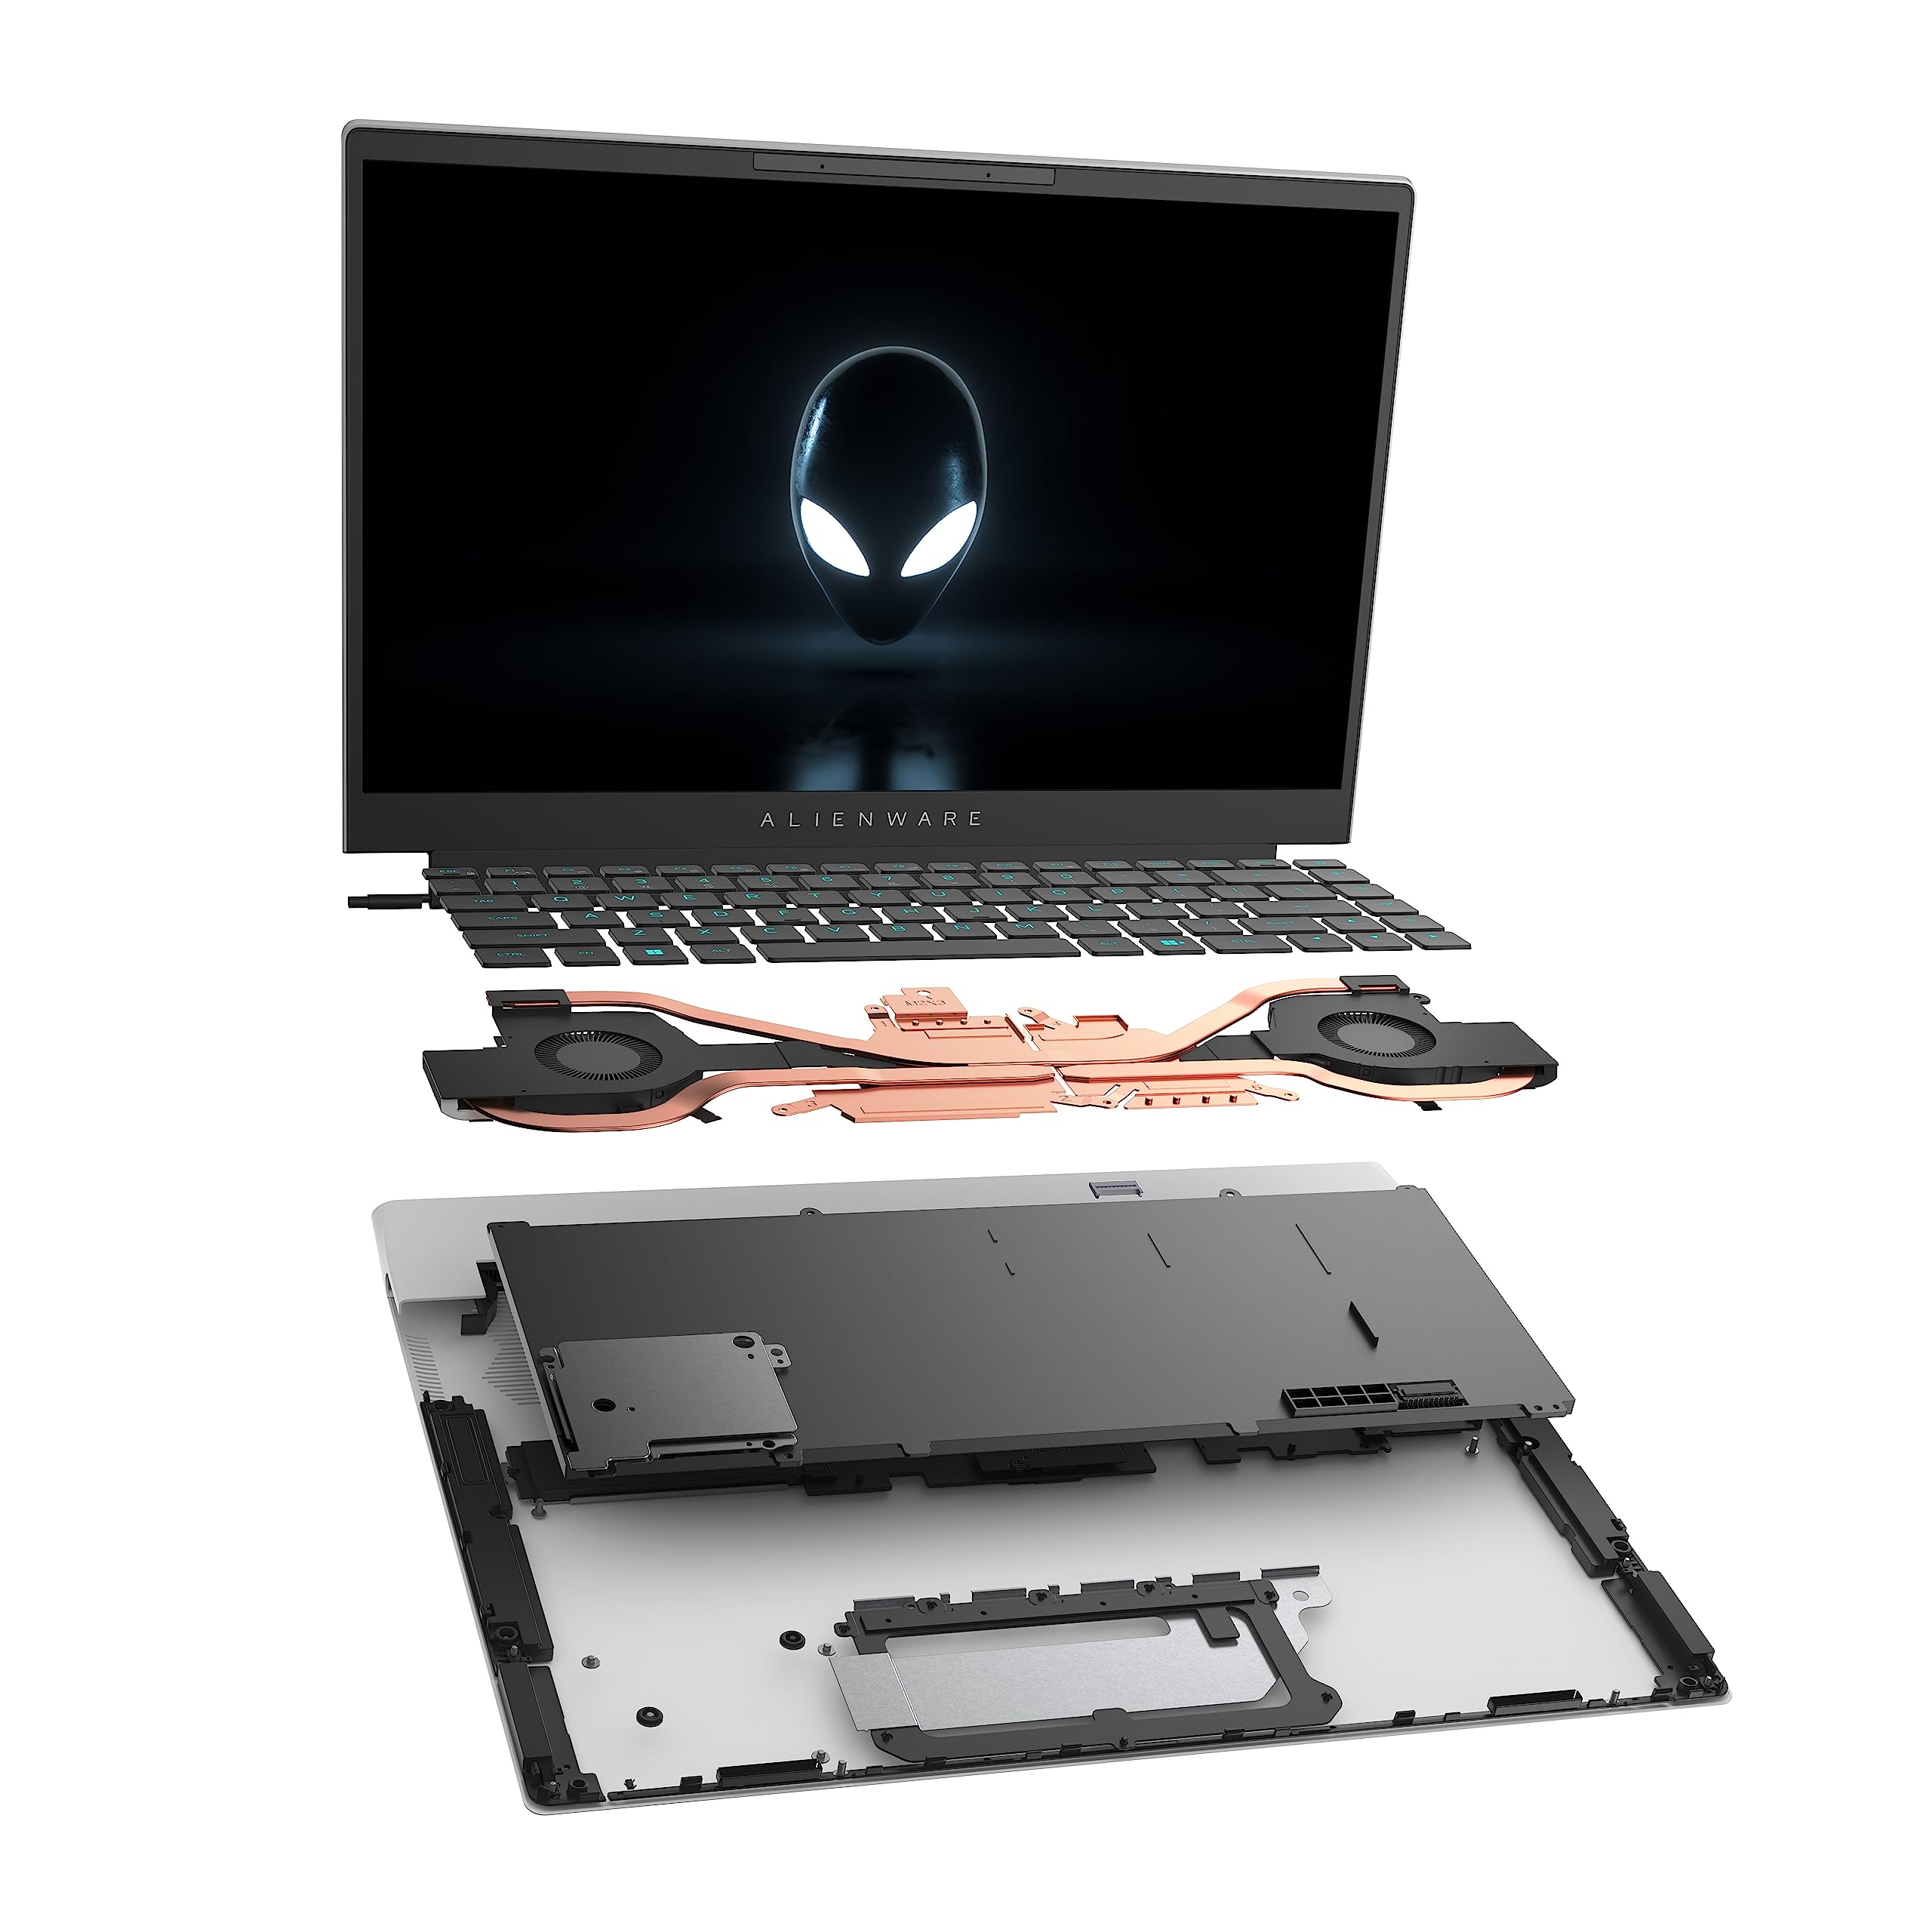 Alienware X14, 144Hz, 3ms, 2TB NVMe Gaming Laptop - i7-12700H (14 Cores,  4.7GHz), 16GB LPDDR5, Nvidia GeForce RTX 3060, SD Card Reader, WIFI 6E & BT  